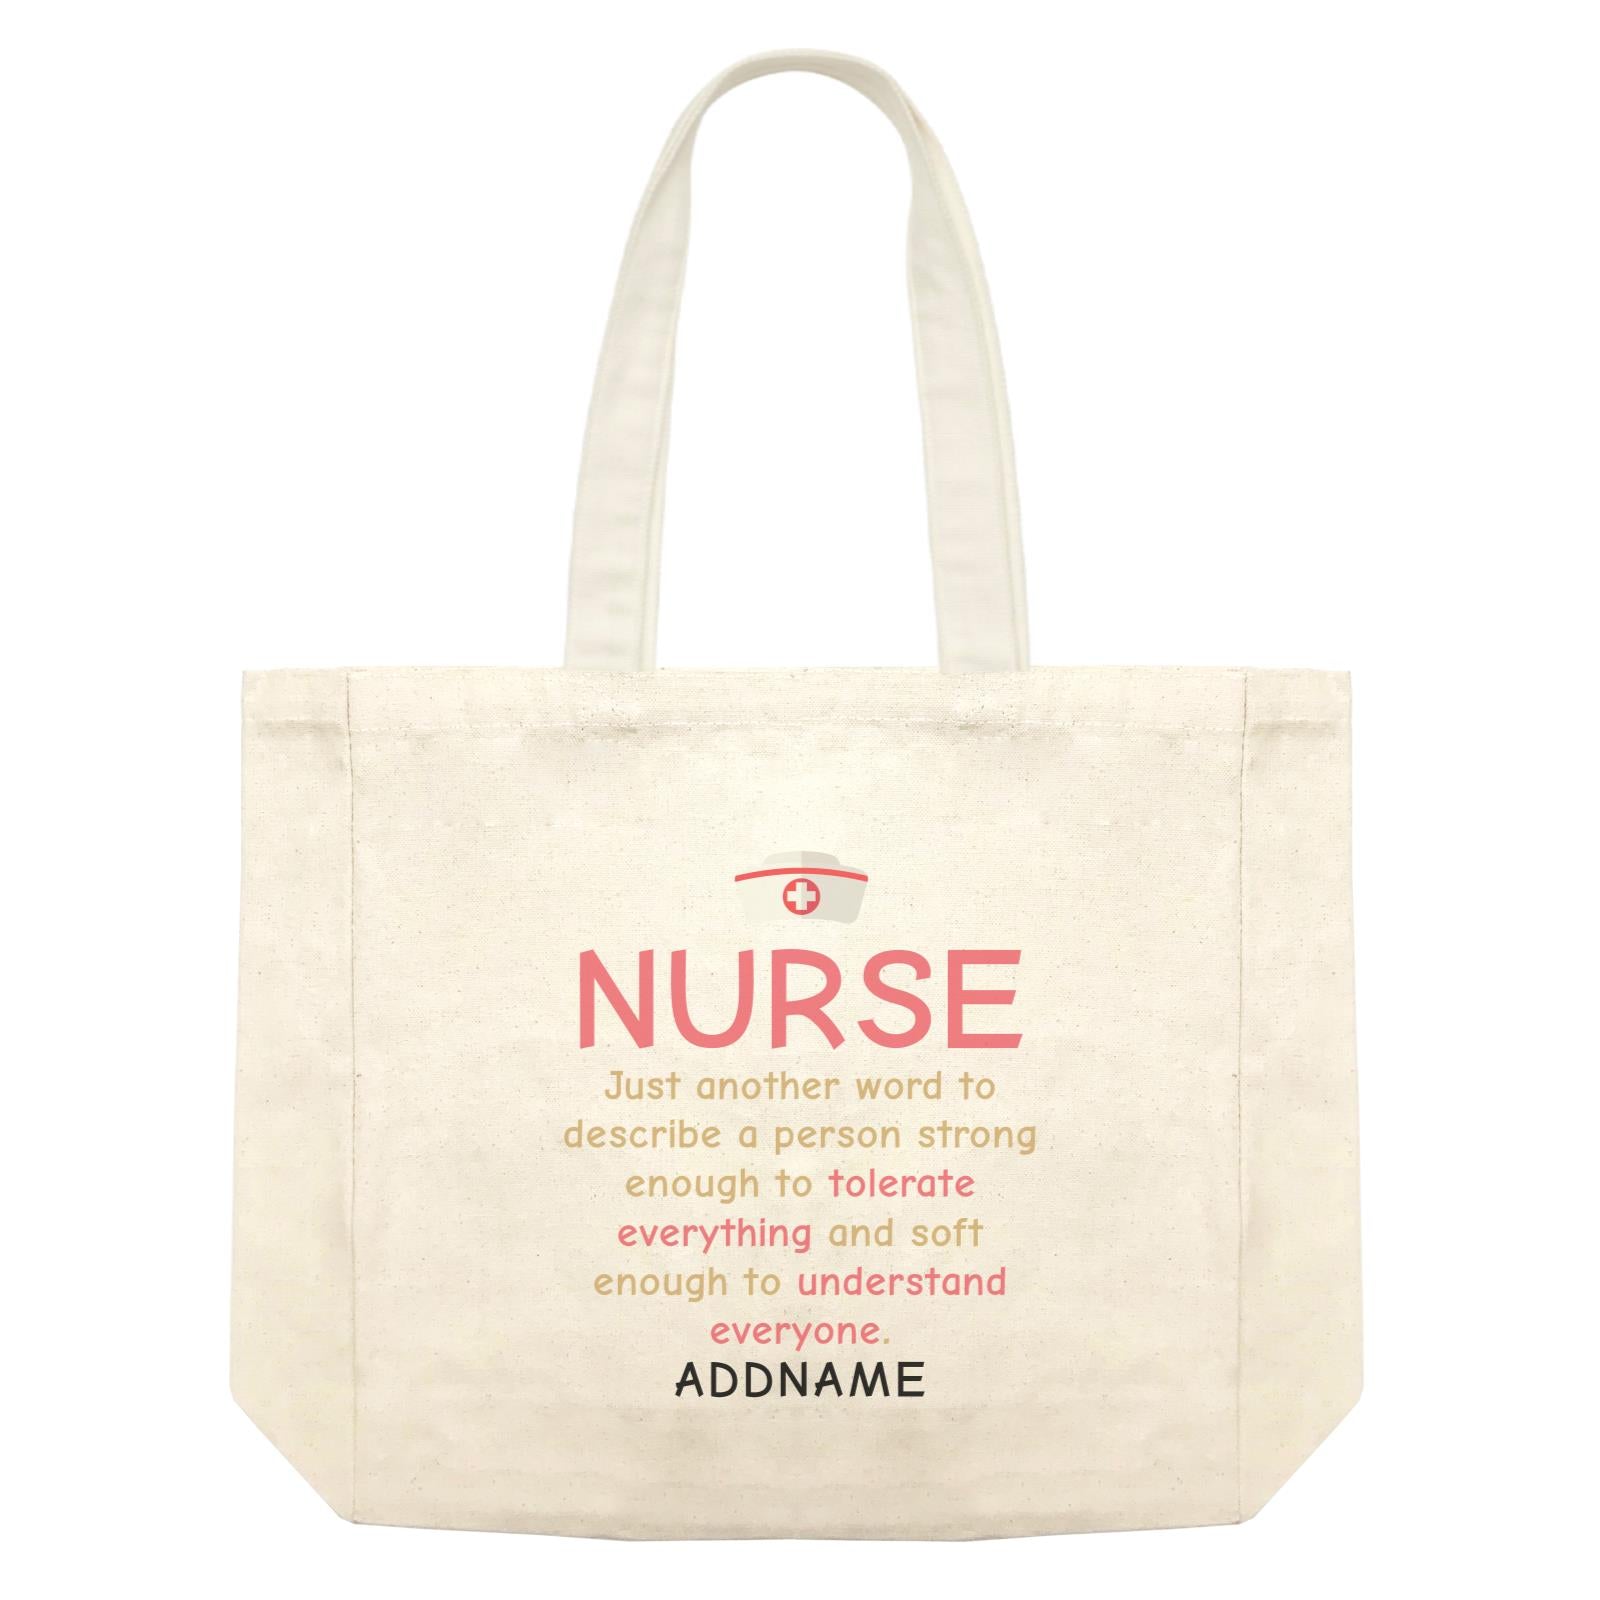 Nurse Quotes Just Another Word To Describe A Person Strong Addname Shopping Bag